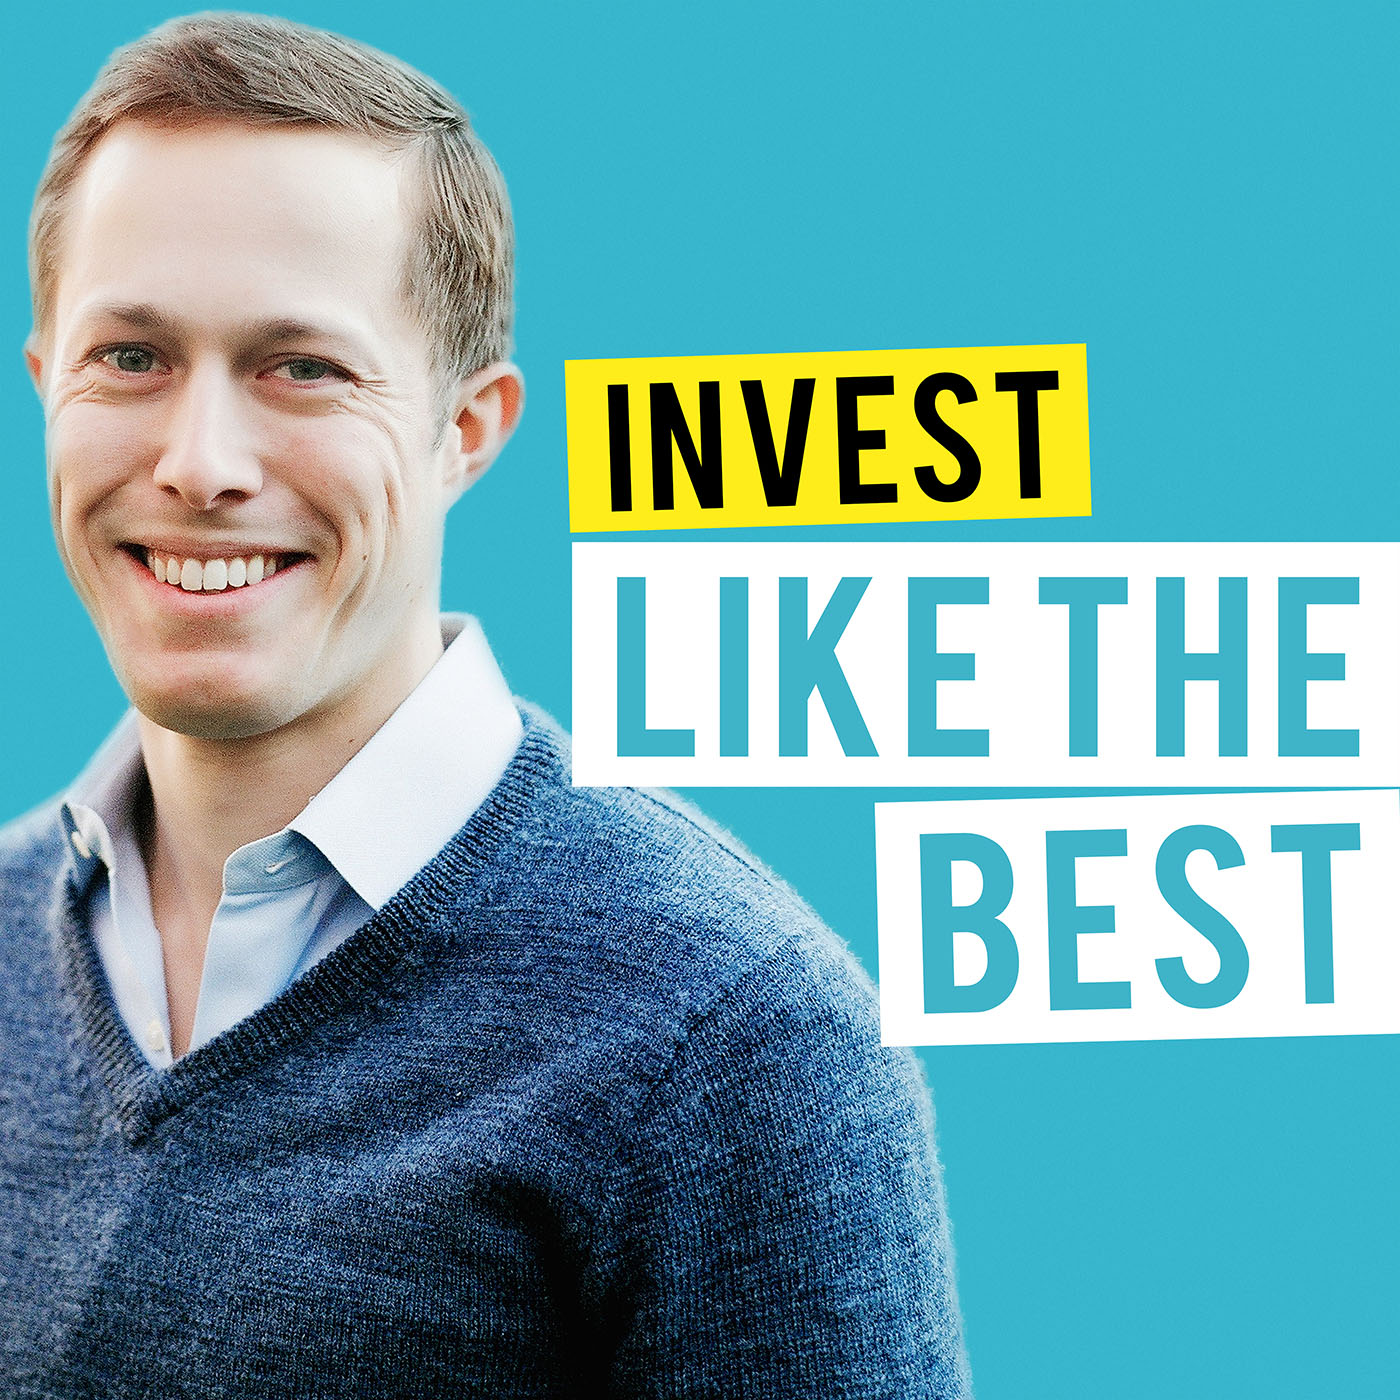 Josh Kopelman - The Past, Present, And Future Of Seed Investing